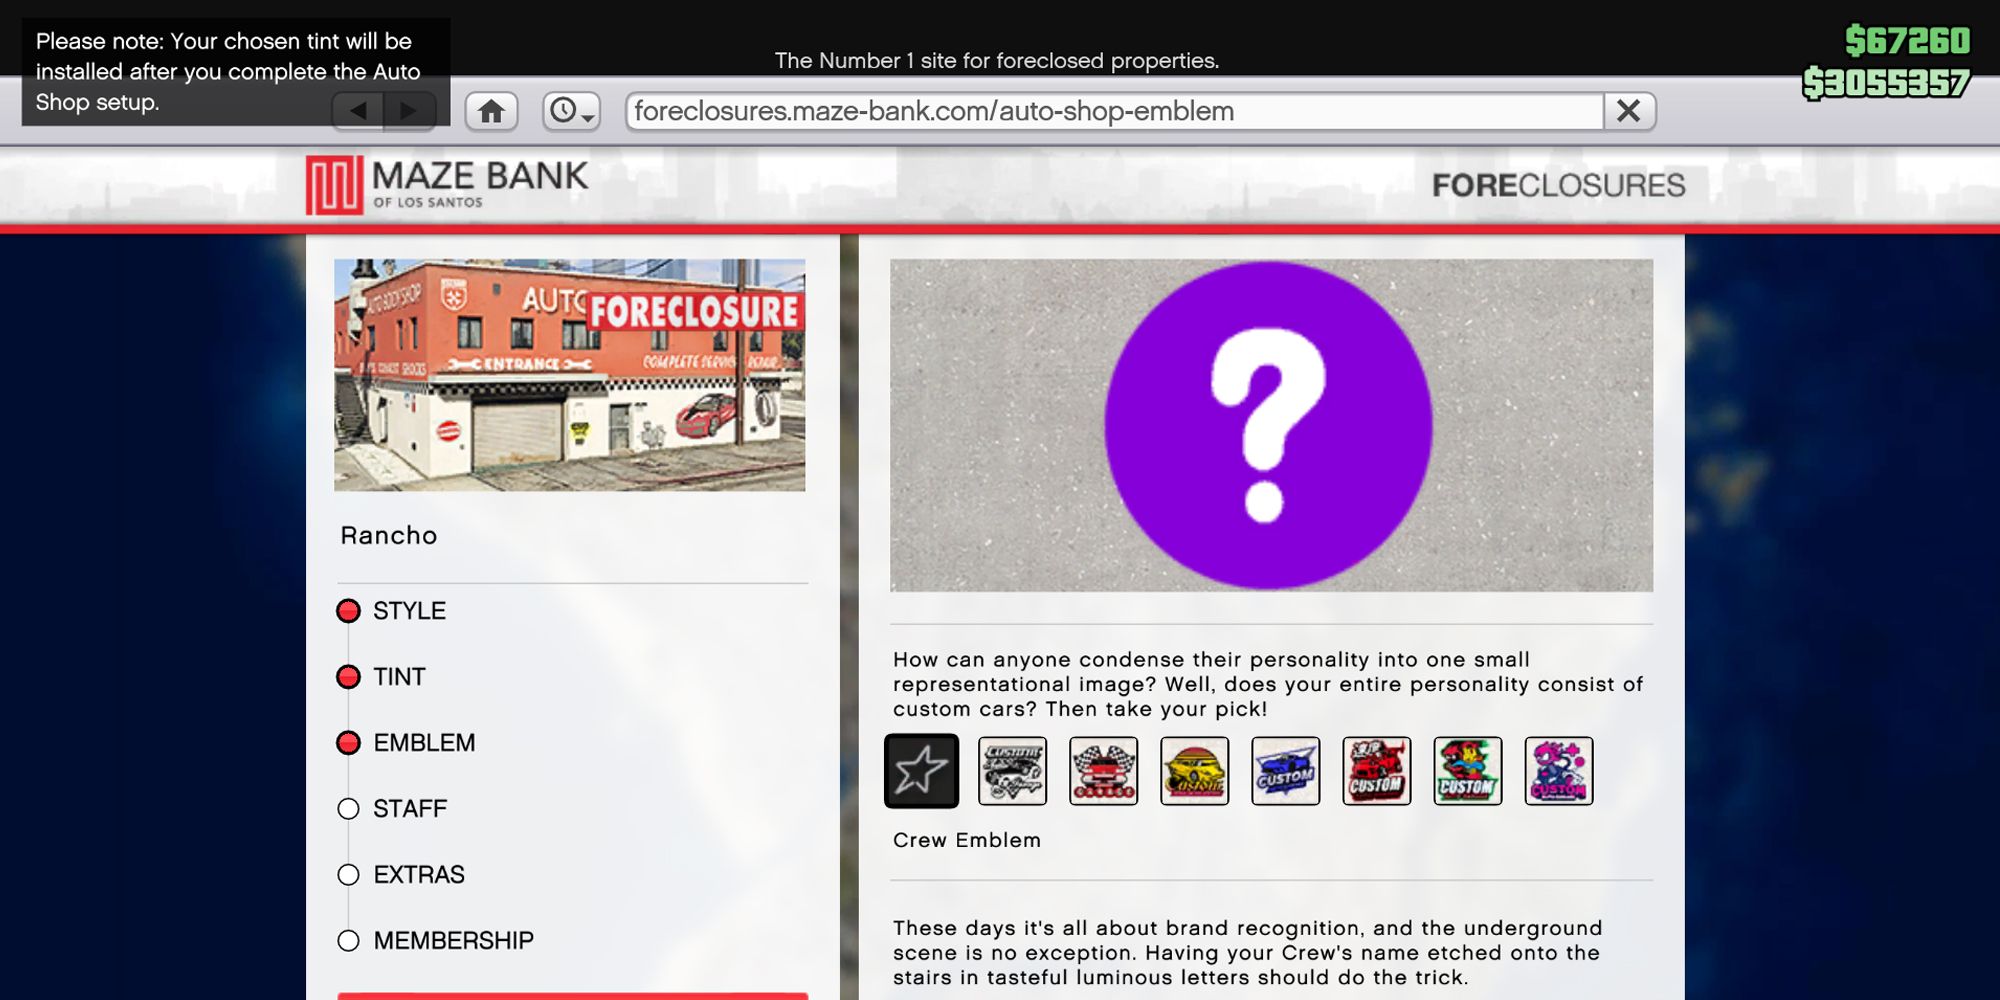 Image depicts the Emblem Upgrade Menu on Maze Bank Foreclosures in Grand Theft Auto Online. On the left is a list of all of the upgrades available, and on the right are small rectangles showing a preview of the different emblems available for the Auto Shop.